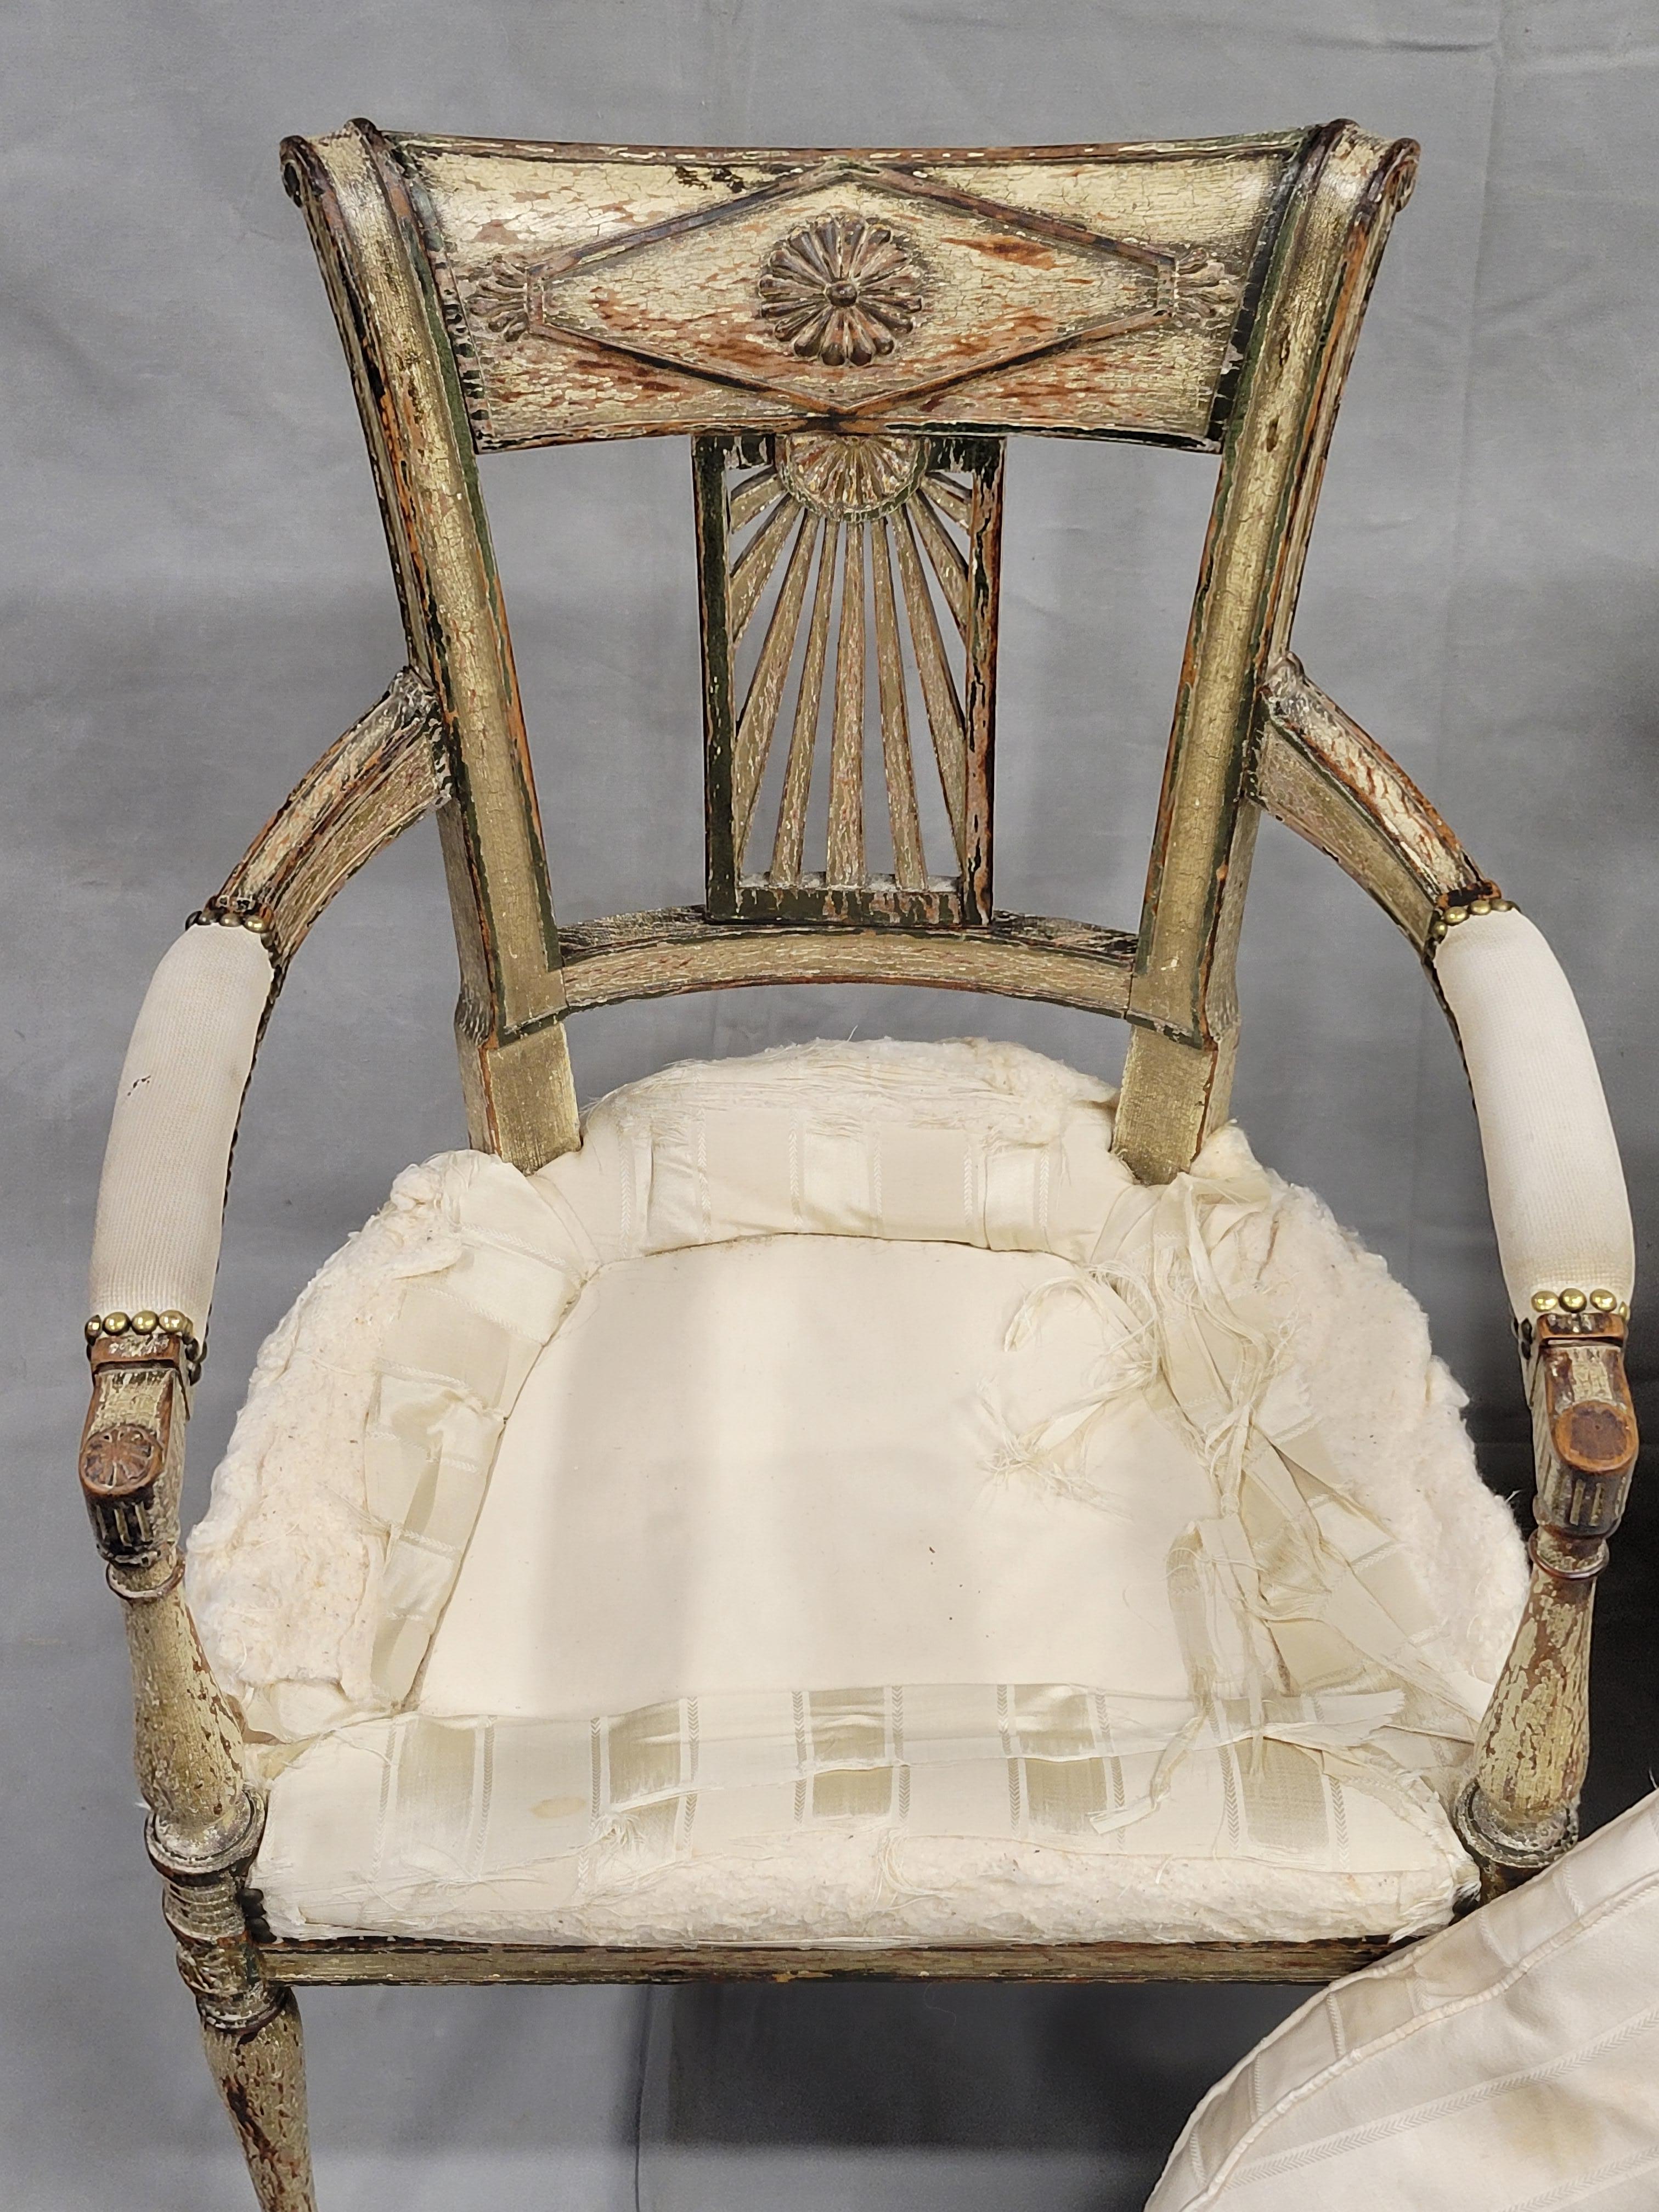 Antique Maison Jansen Style French Louis XVI Painted Fauteuil Chairs - a Pair For Sale 4